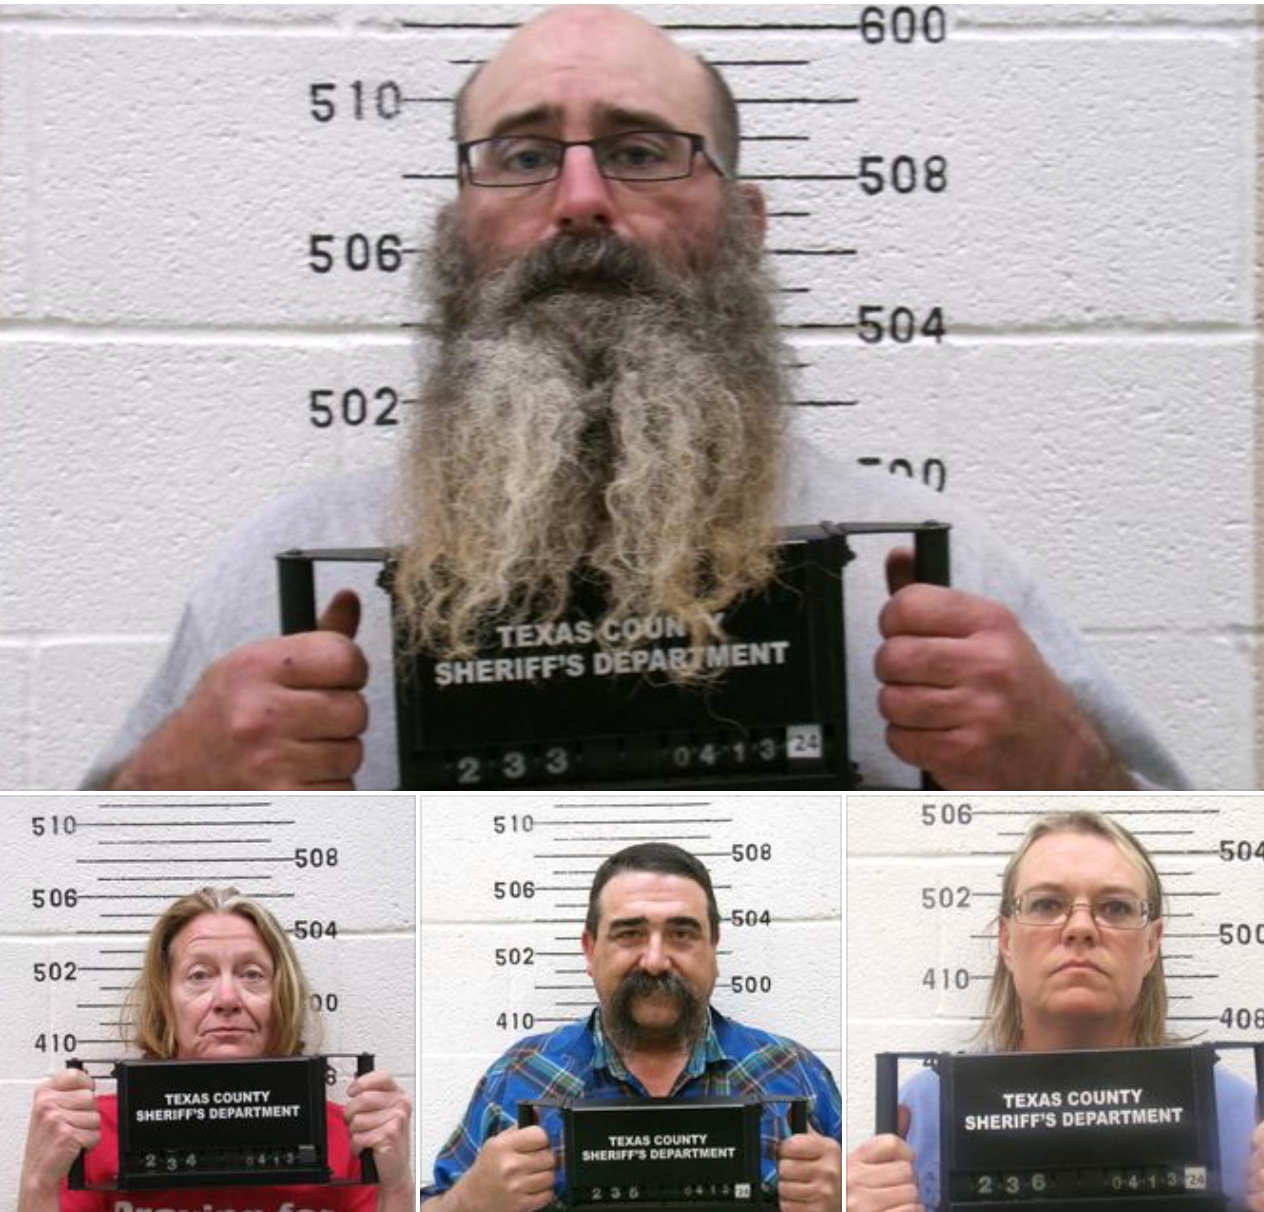 Counterclockwise from top-43-year-old Tad Bert Cullum; 54-year-old Tifany Machel Adams, 50-year-old Cole Earl Twombly, and 44-year-old Cora Twombly -photos Oklahoma State Bureau of Investigation